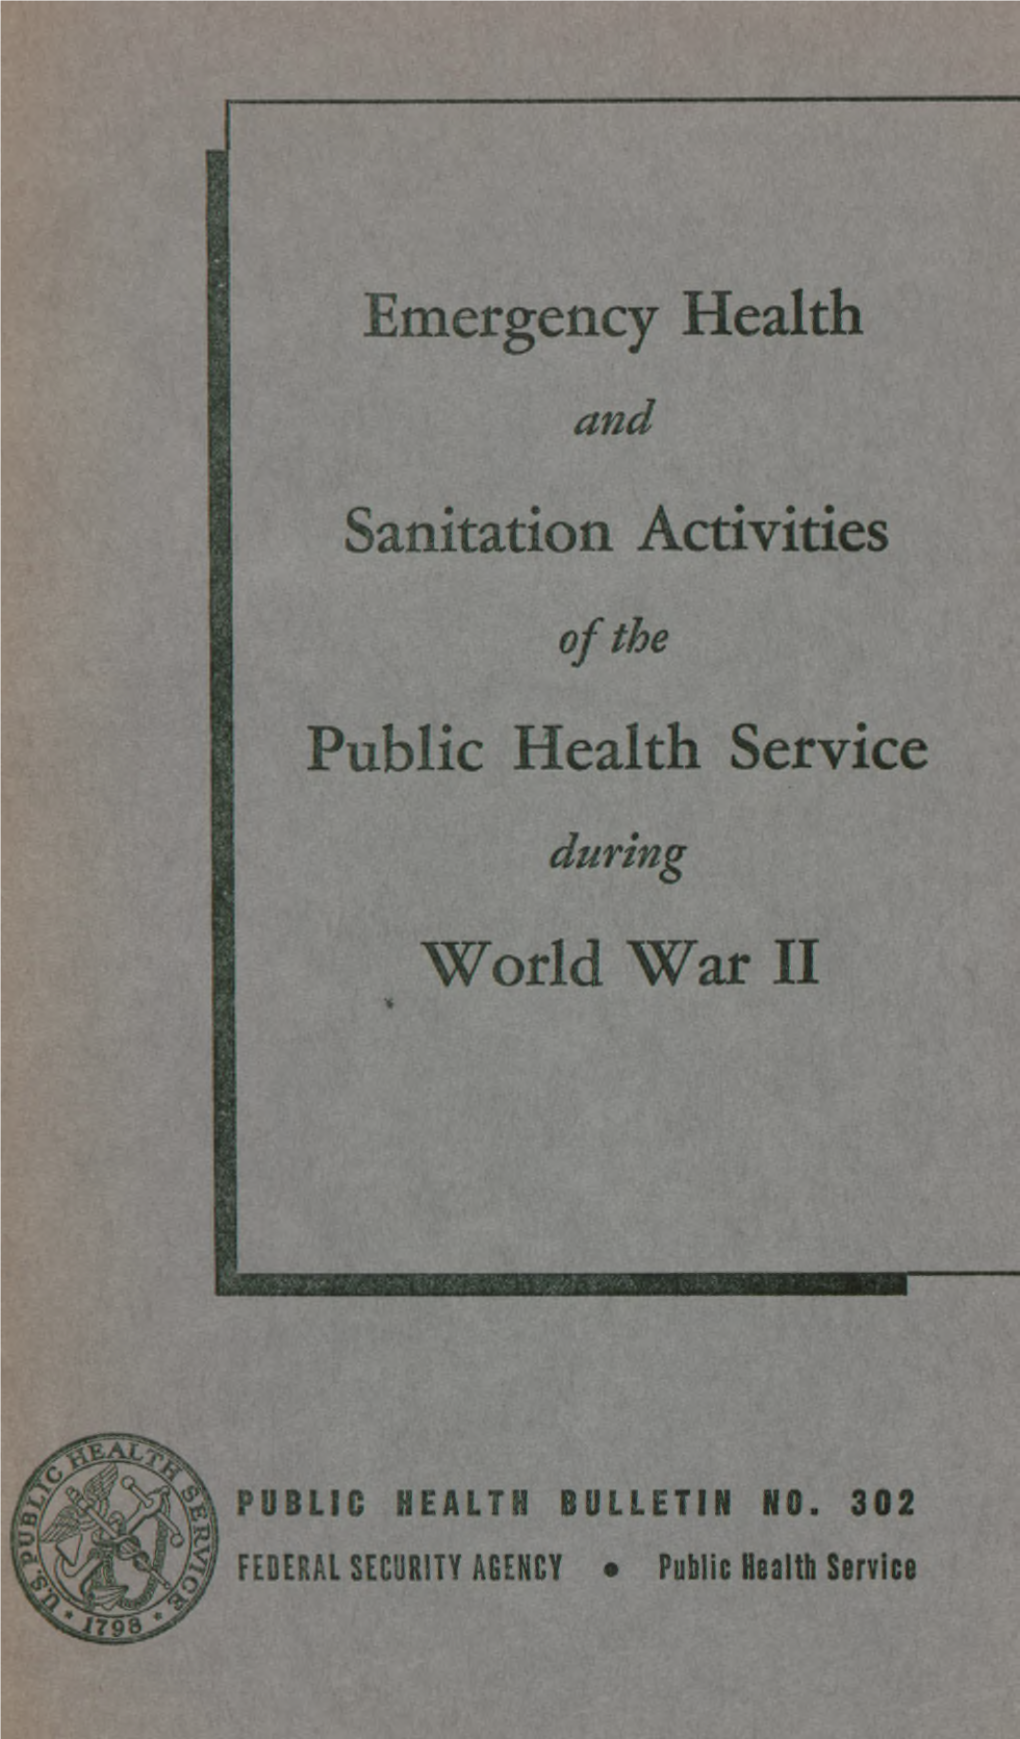 Emergency Health and Sanitation Activities of the Public Health Service During World War II